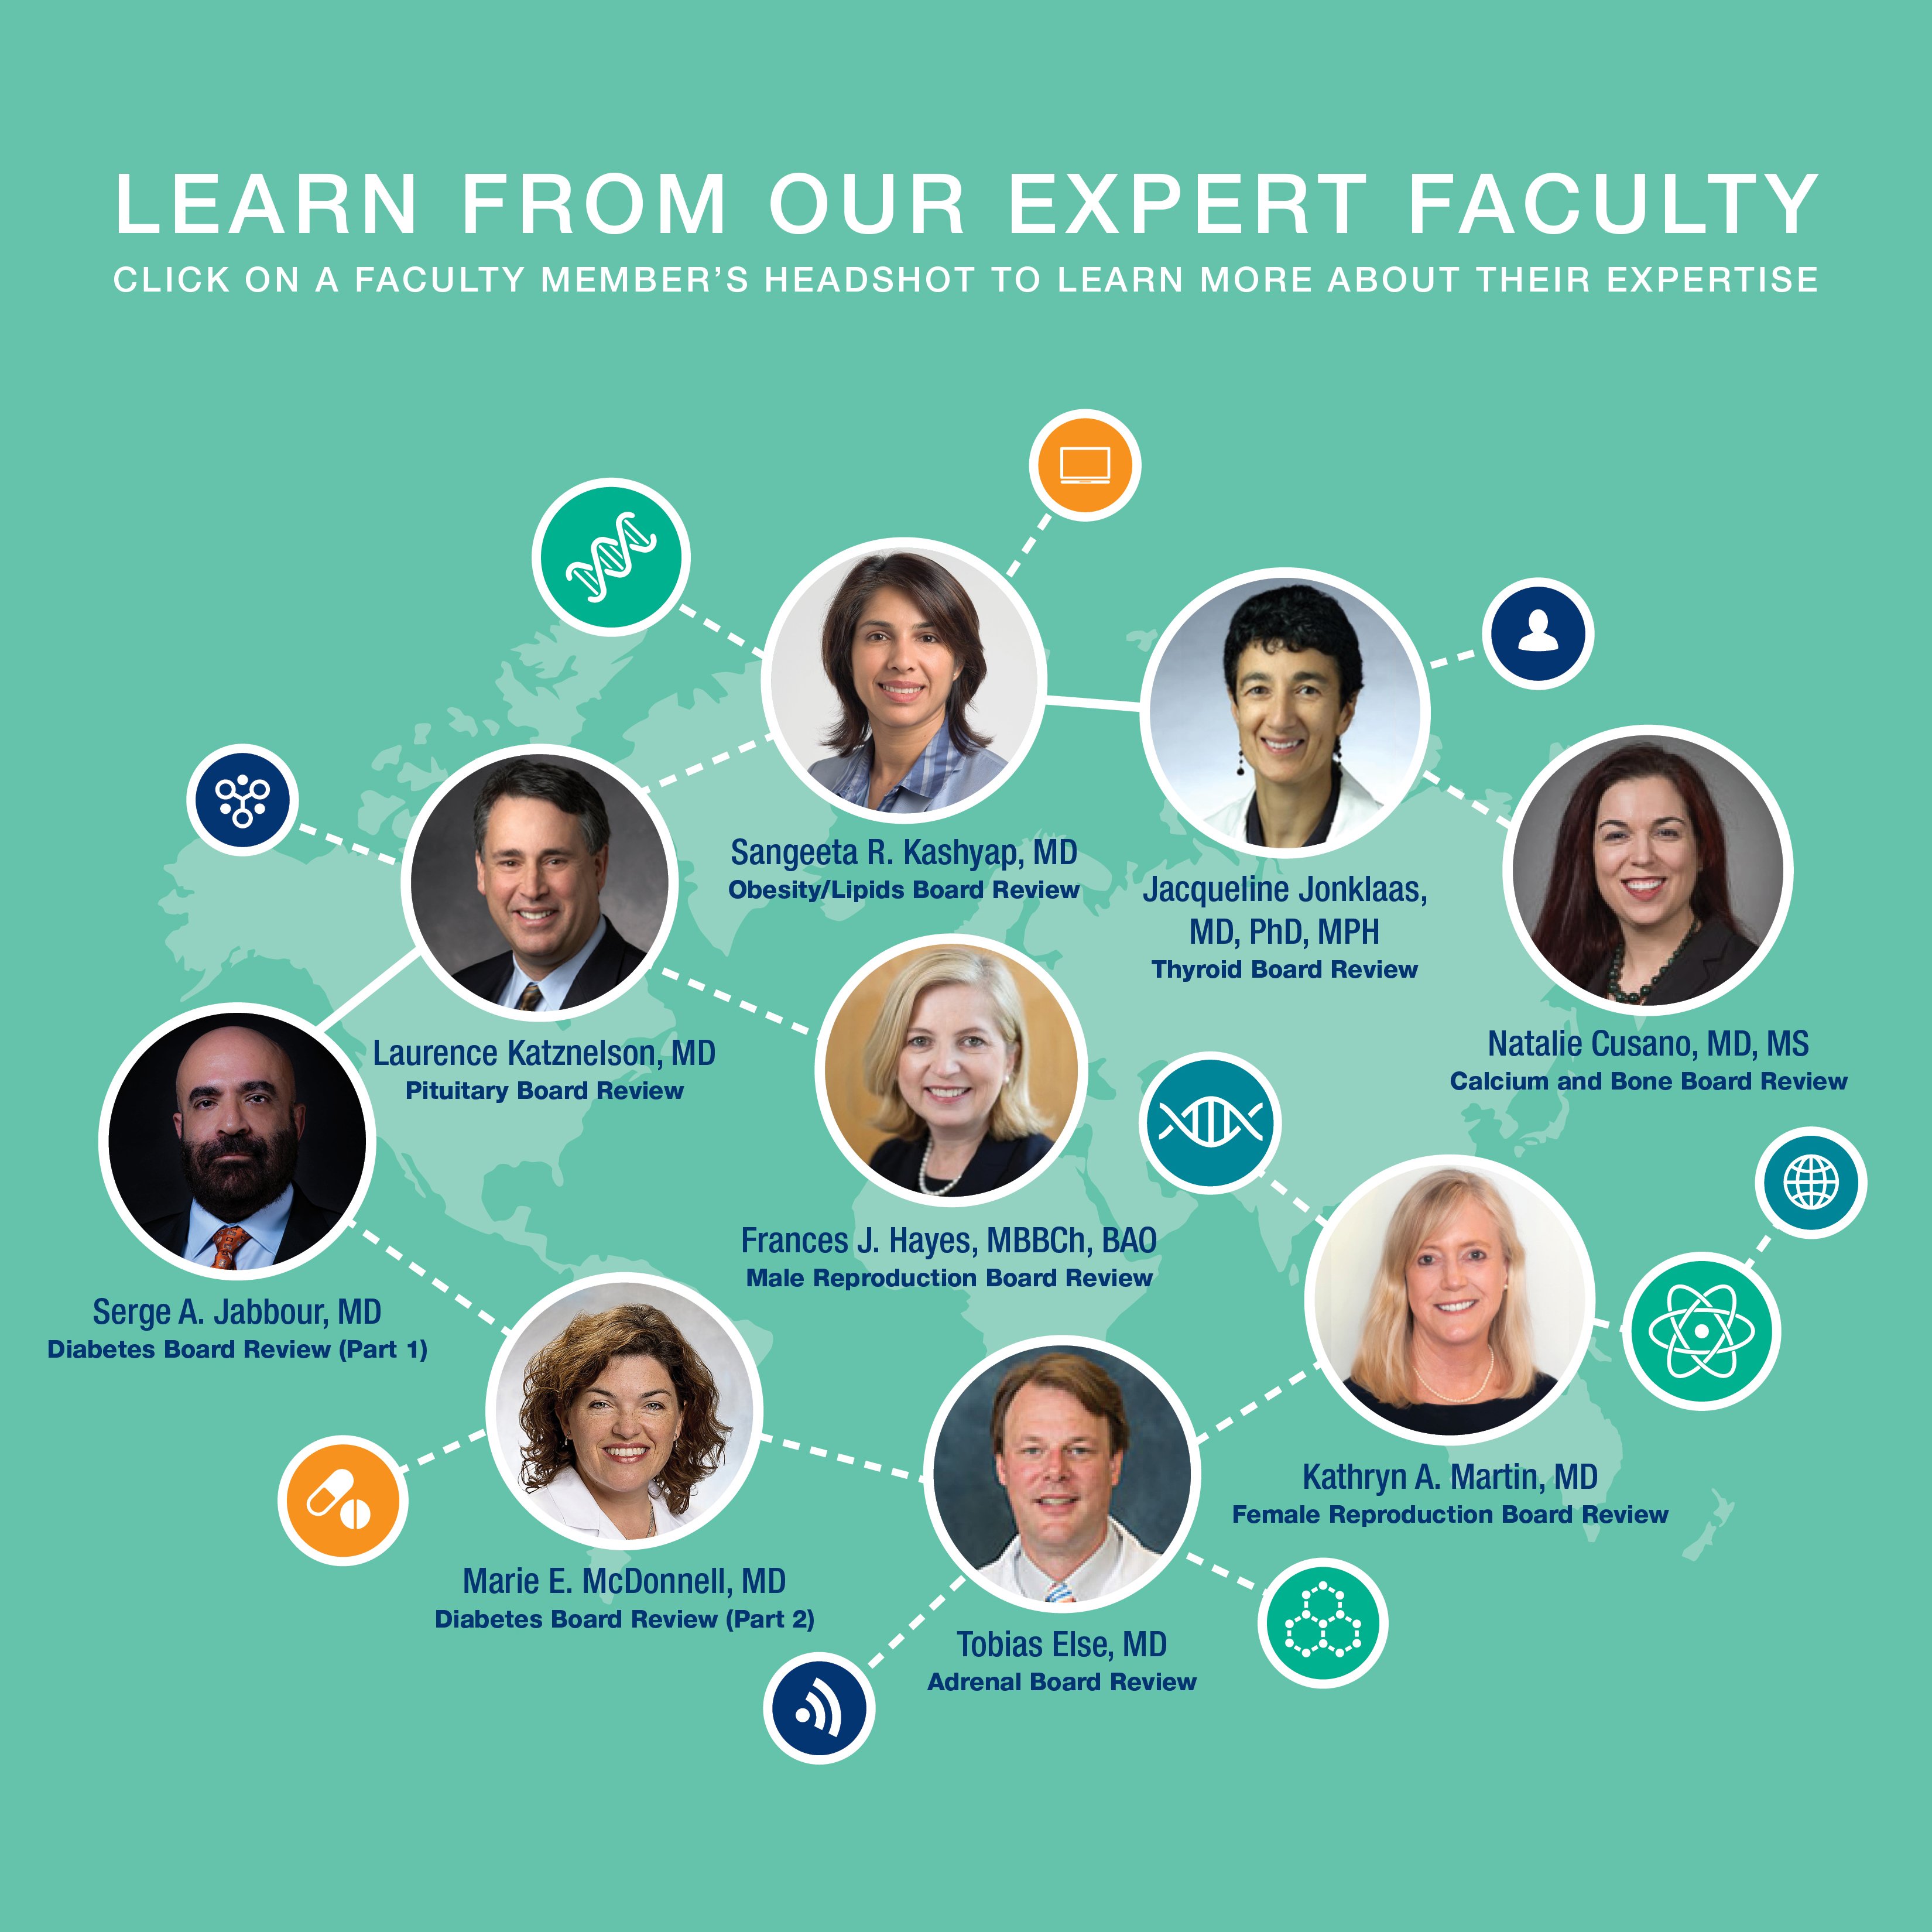 Learn from our expert faculty